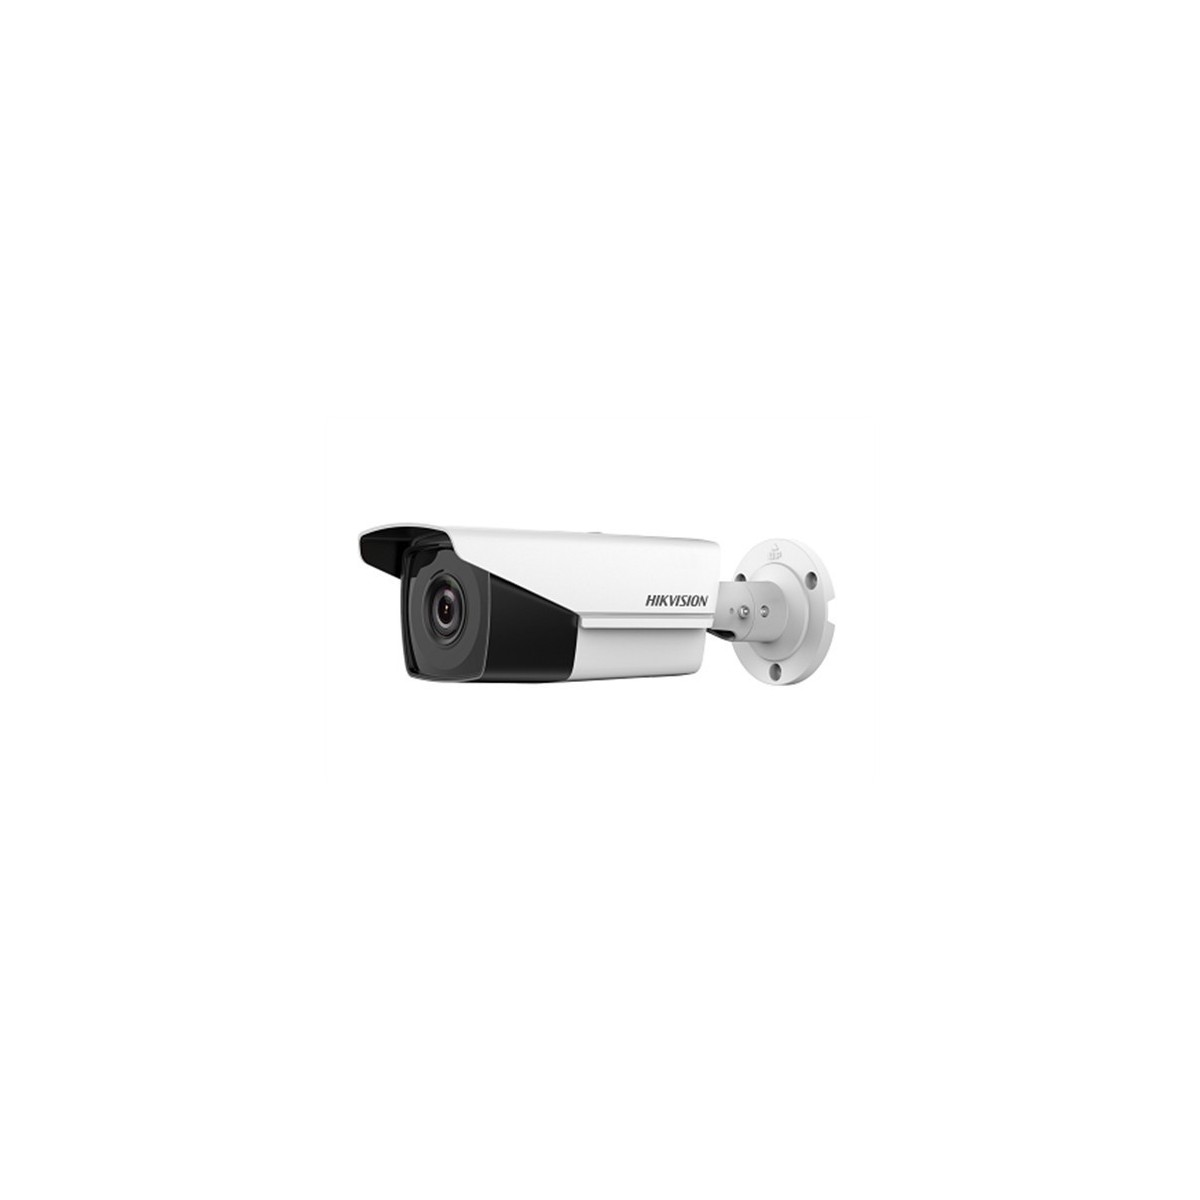 Hikvision DS-2CE16D8T-IT3ZF - CCTV security camera - Outdoor - Wired - English - Bullet - Ceiling/Wall